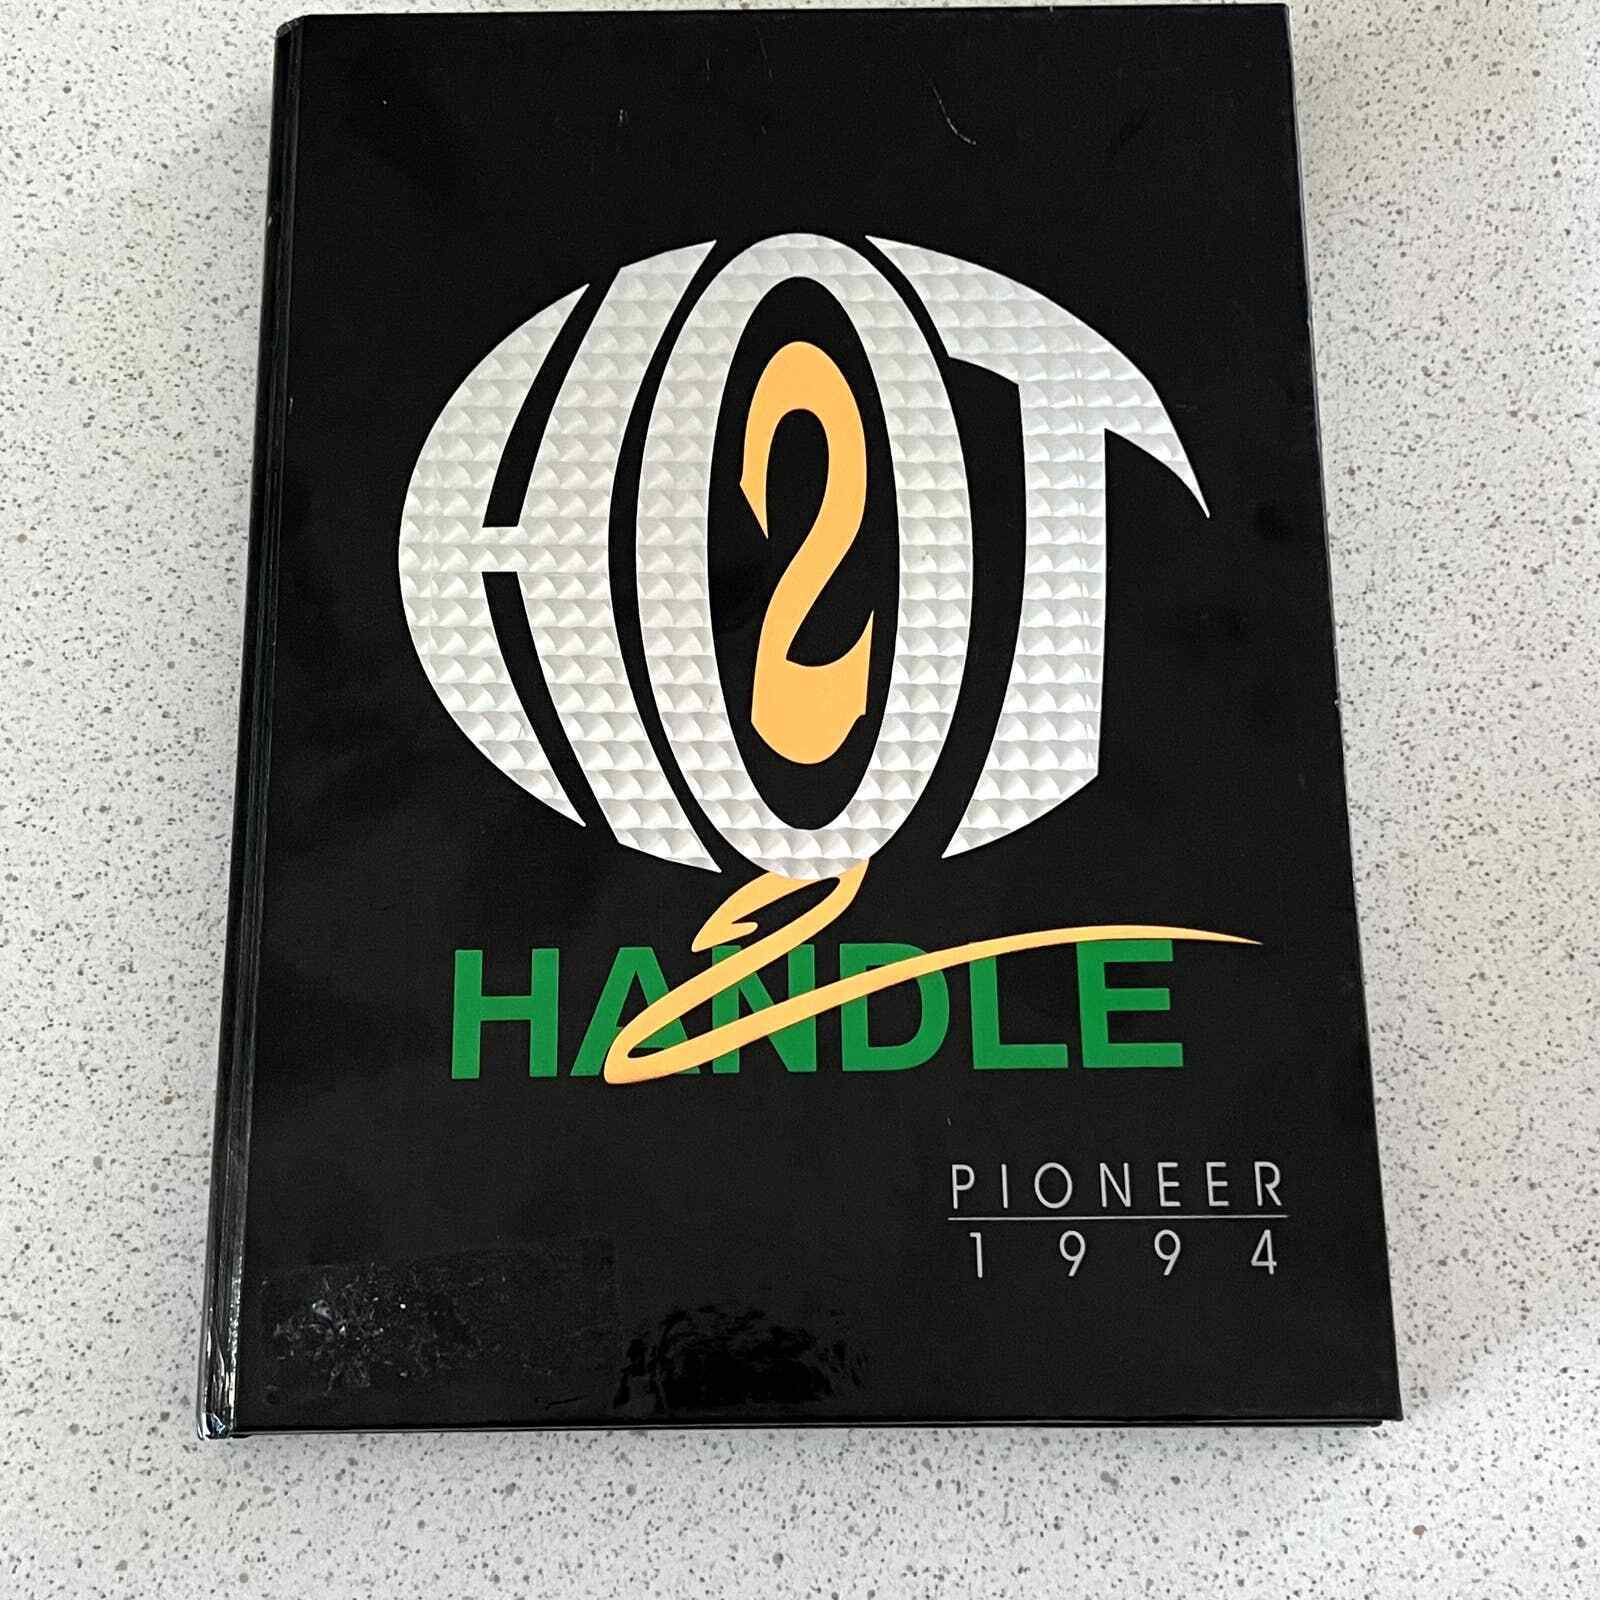 W.E. Boswell Pioneers 1994 Hot 2 Handle High School Yearbook Volume 32